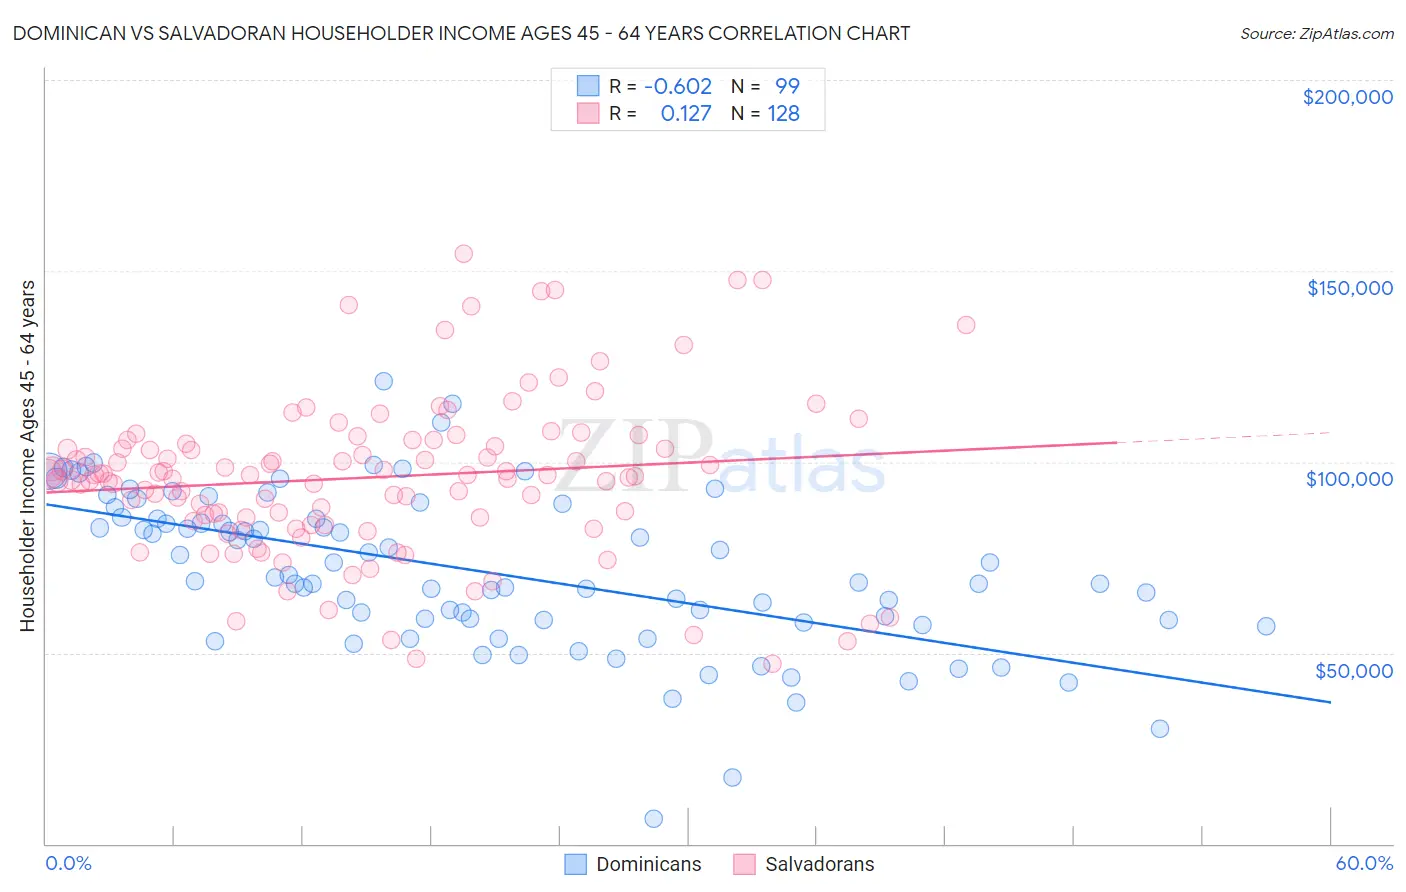 Dominican vs Salvadoran Householder Income Ages 45 - 64 years